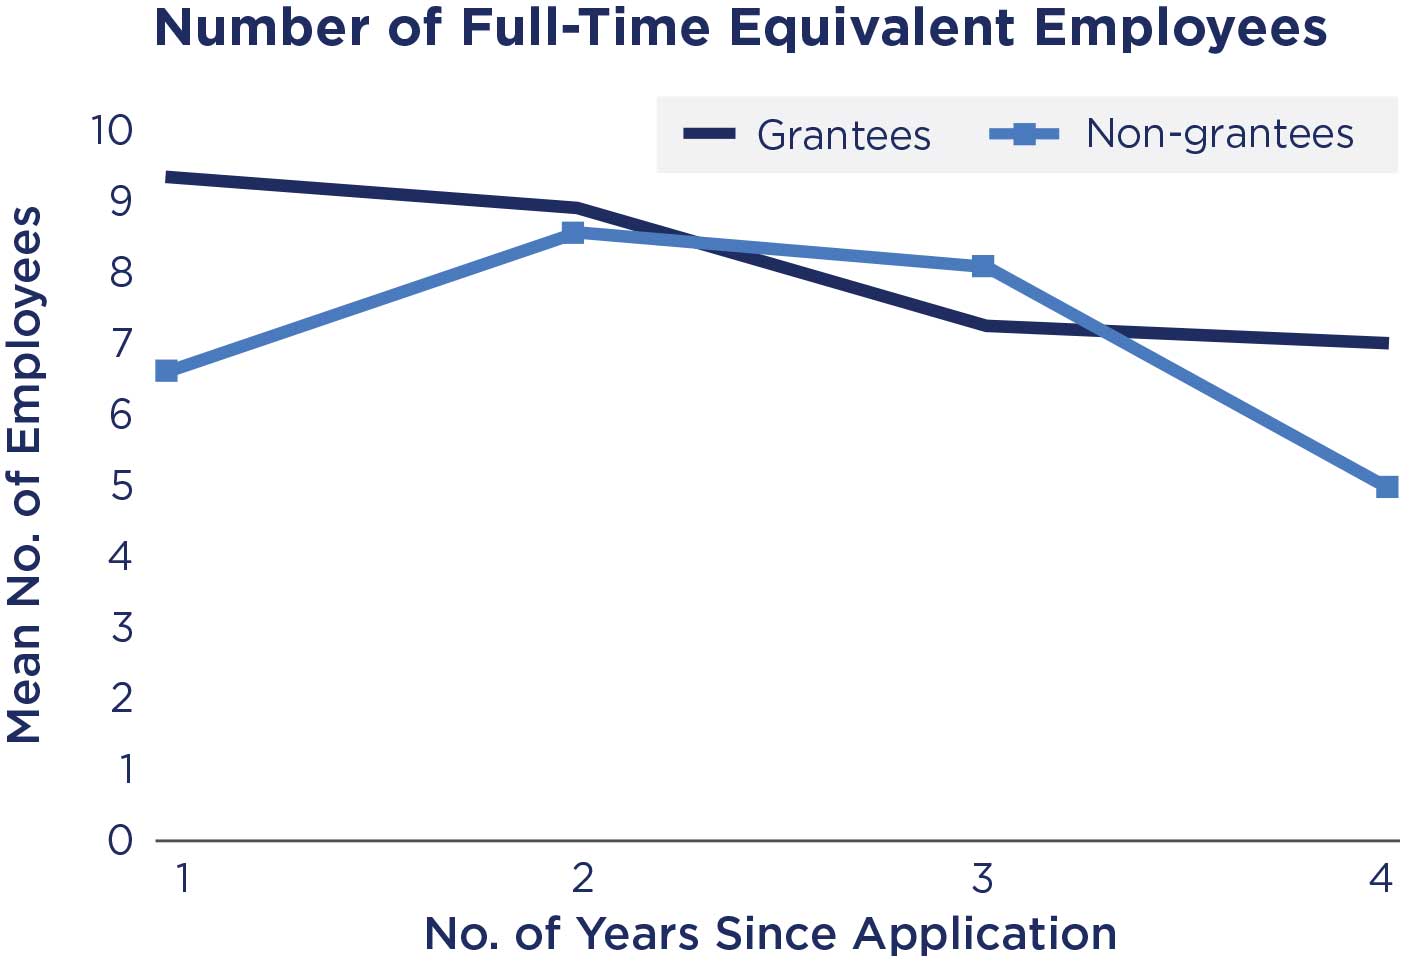 Chart of the Number of Full-Time Equivalent Employees